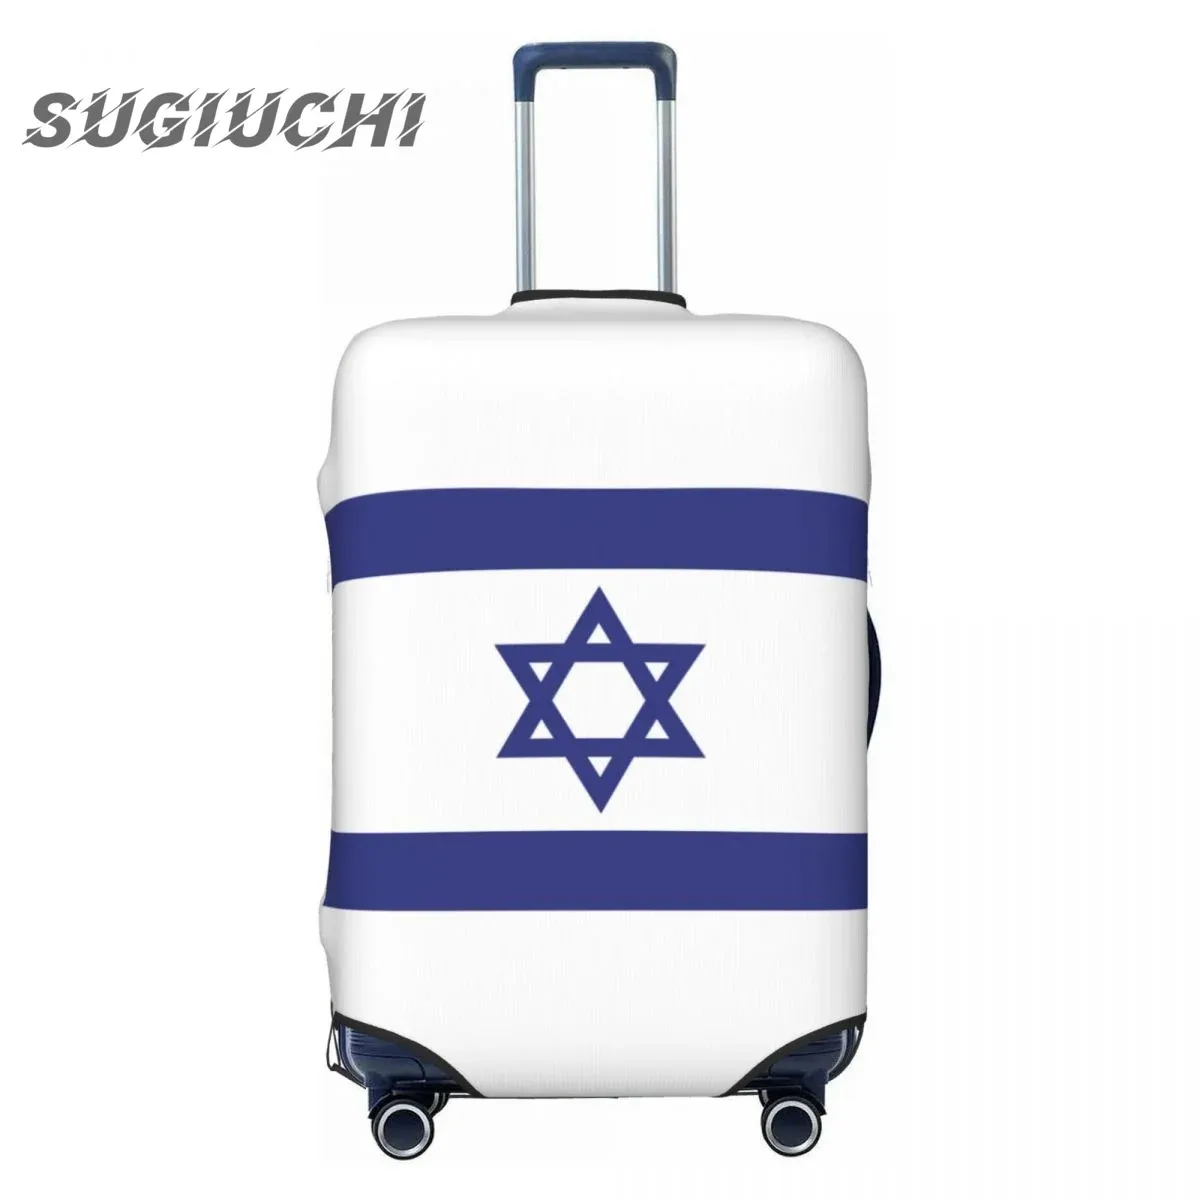 Accessories Israel Country Flag Luggage Cover Suitcase Travel Accessories Printed Elastic Dust Cover Bag Trolley Case Protective